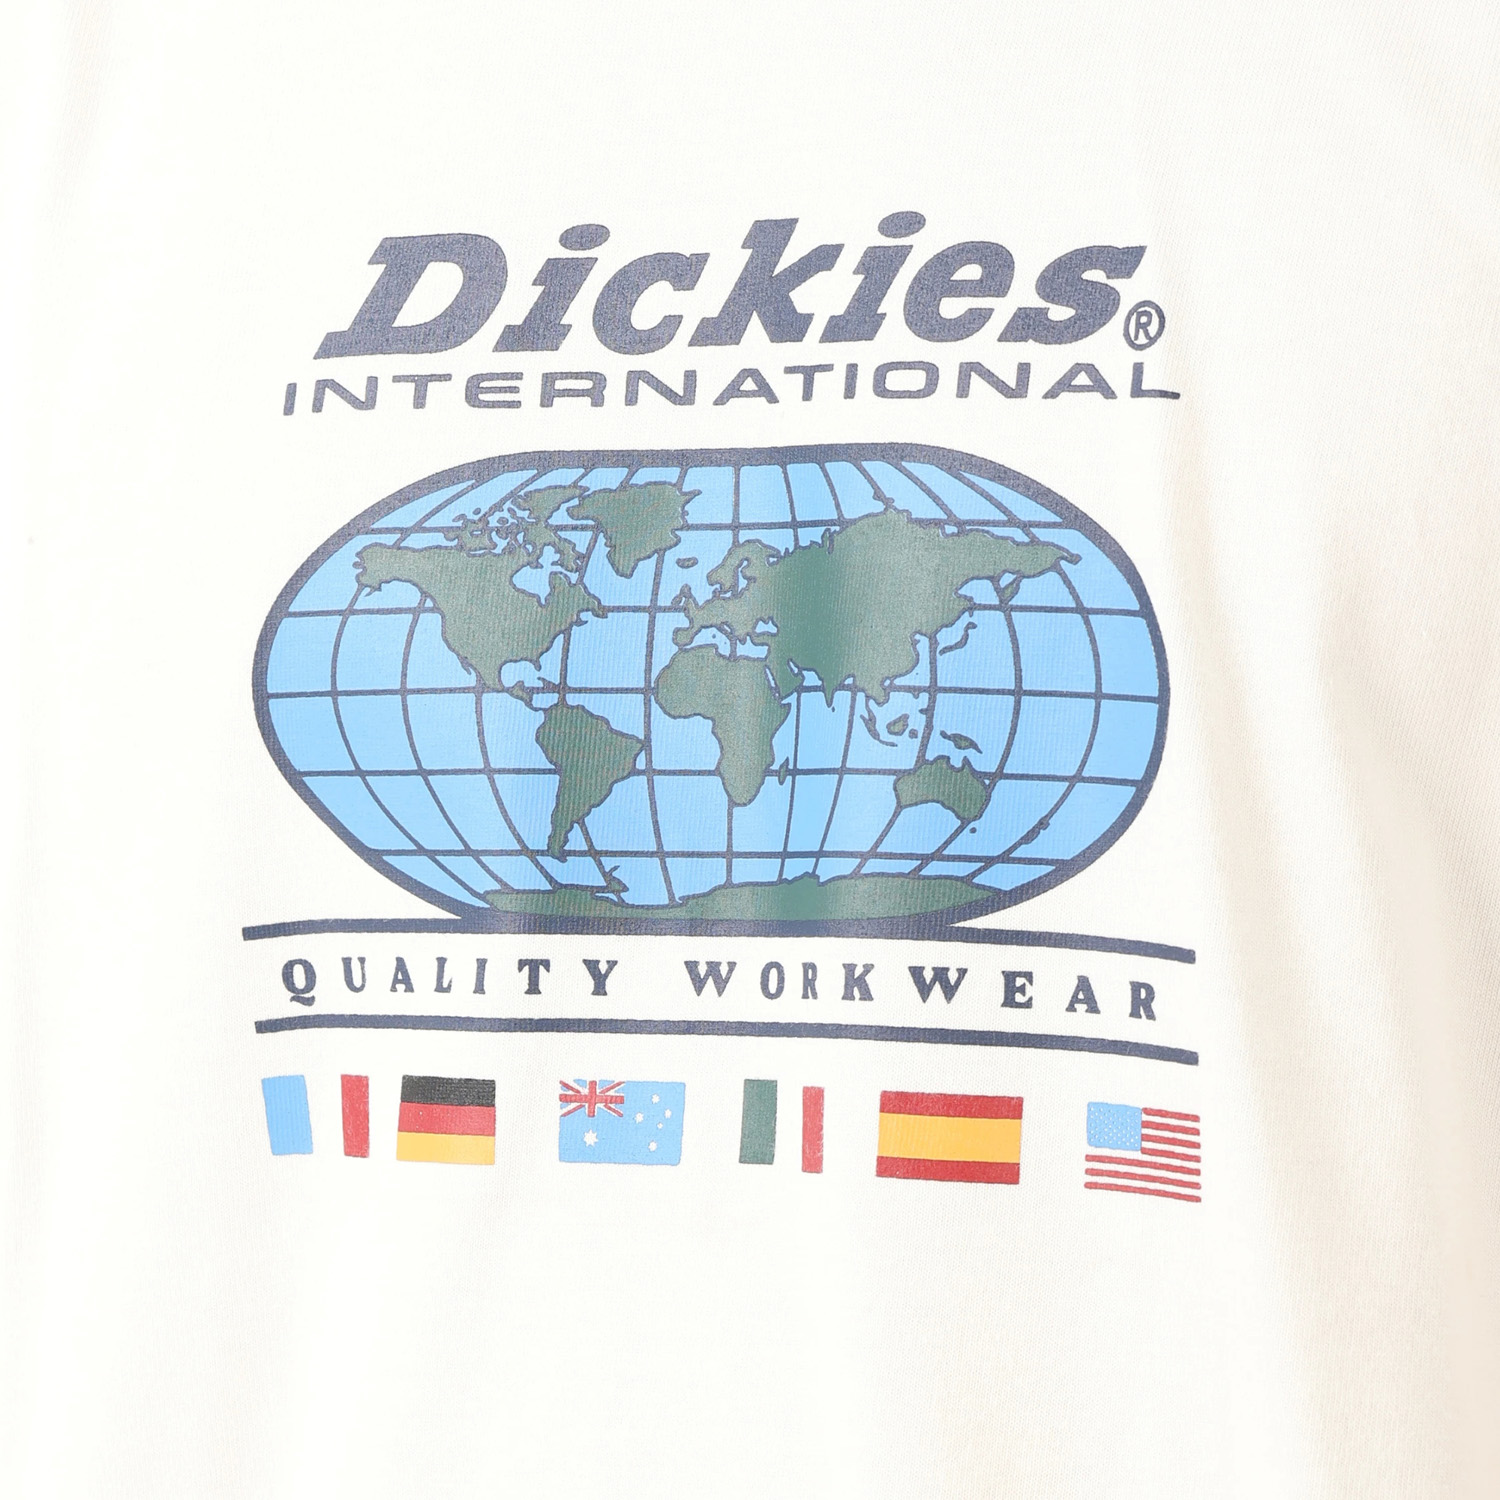 Jake Hayes グラフィック Tシャツ "Dickies Internaional” image number 7